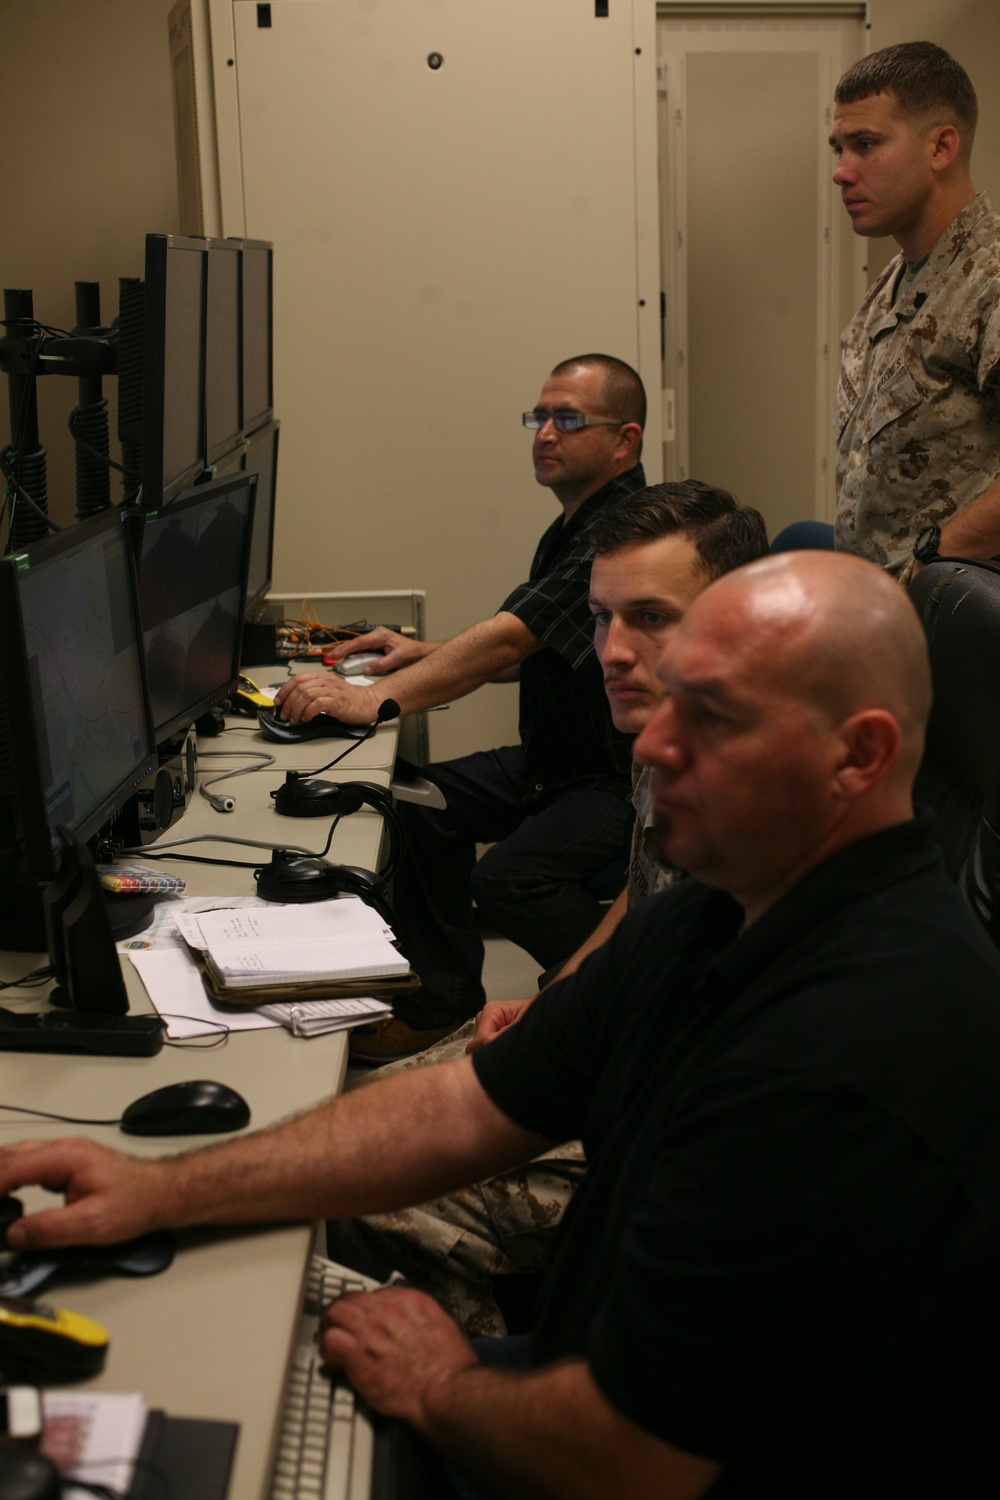 Law enforcement Marines confront battlefield reality in virtual world